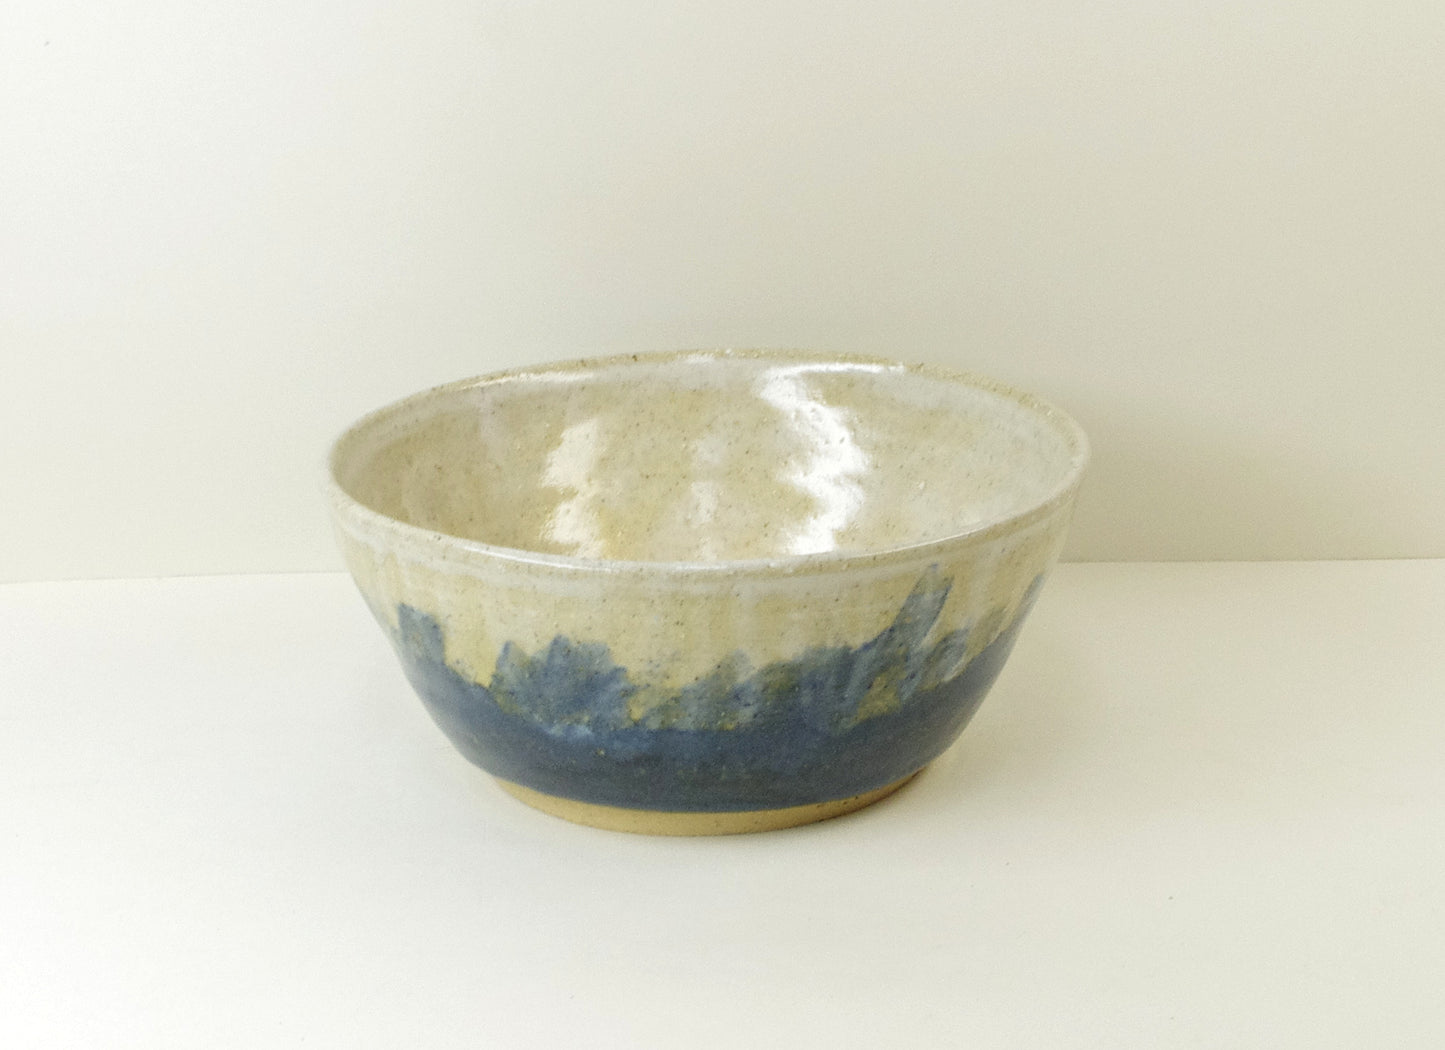 2126, Soup Bowl, 5 1/2 x 2 3/8 inches, hand thrown Stoneware